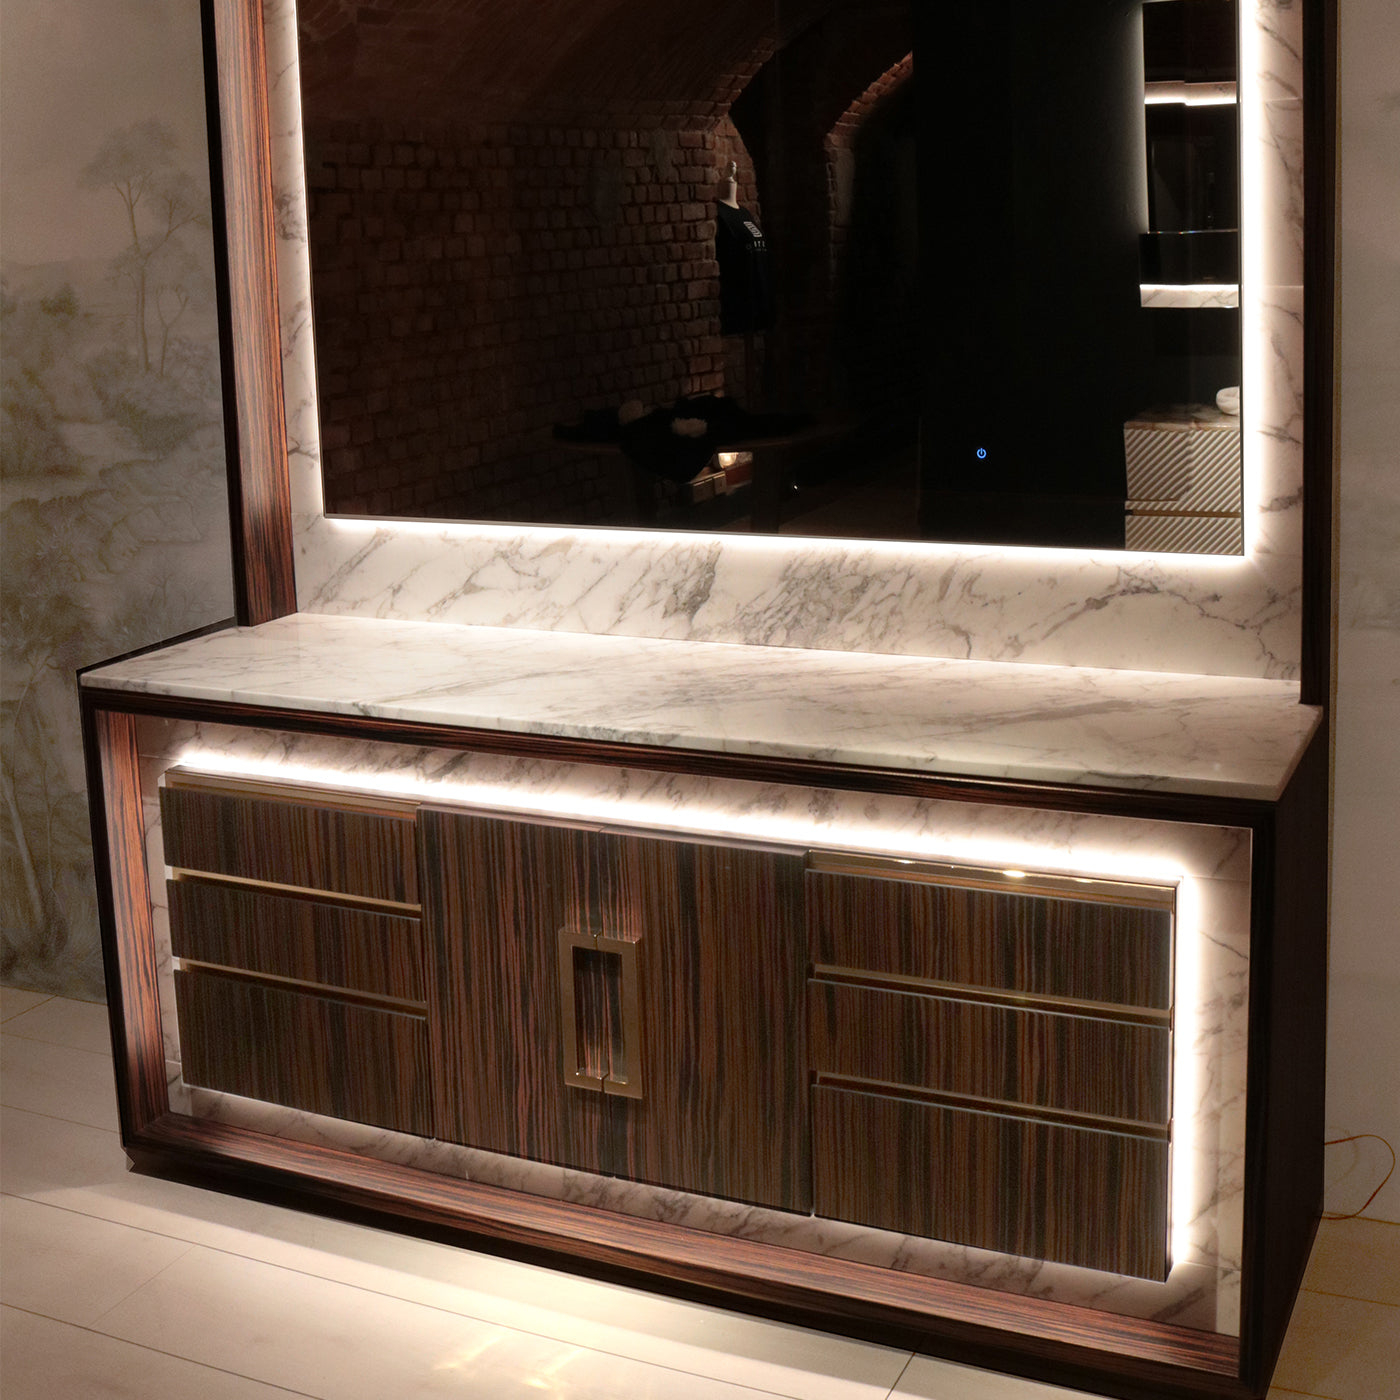 Frame LF Arabescato sideboard with mirror - Alternative view 1